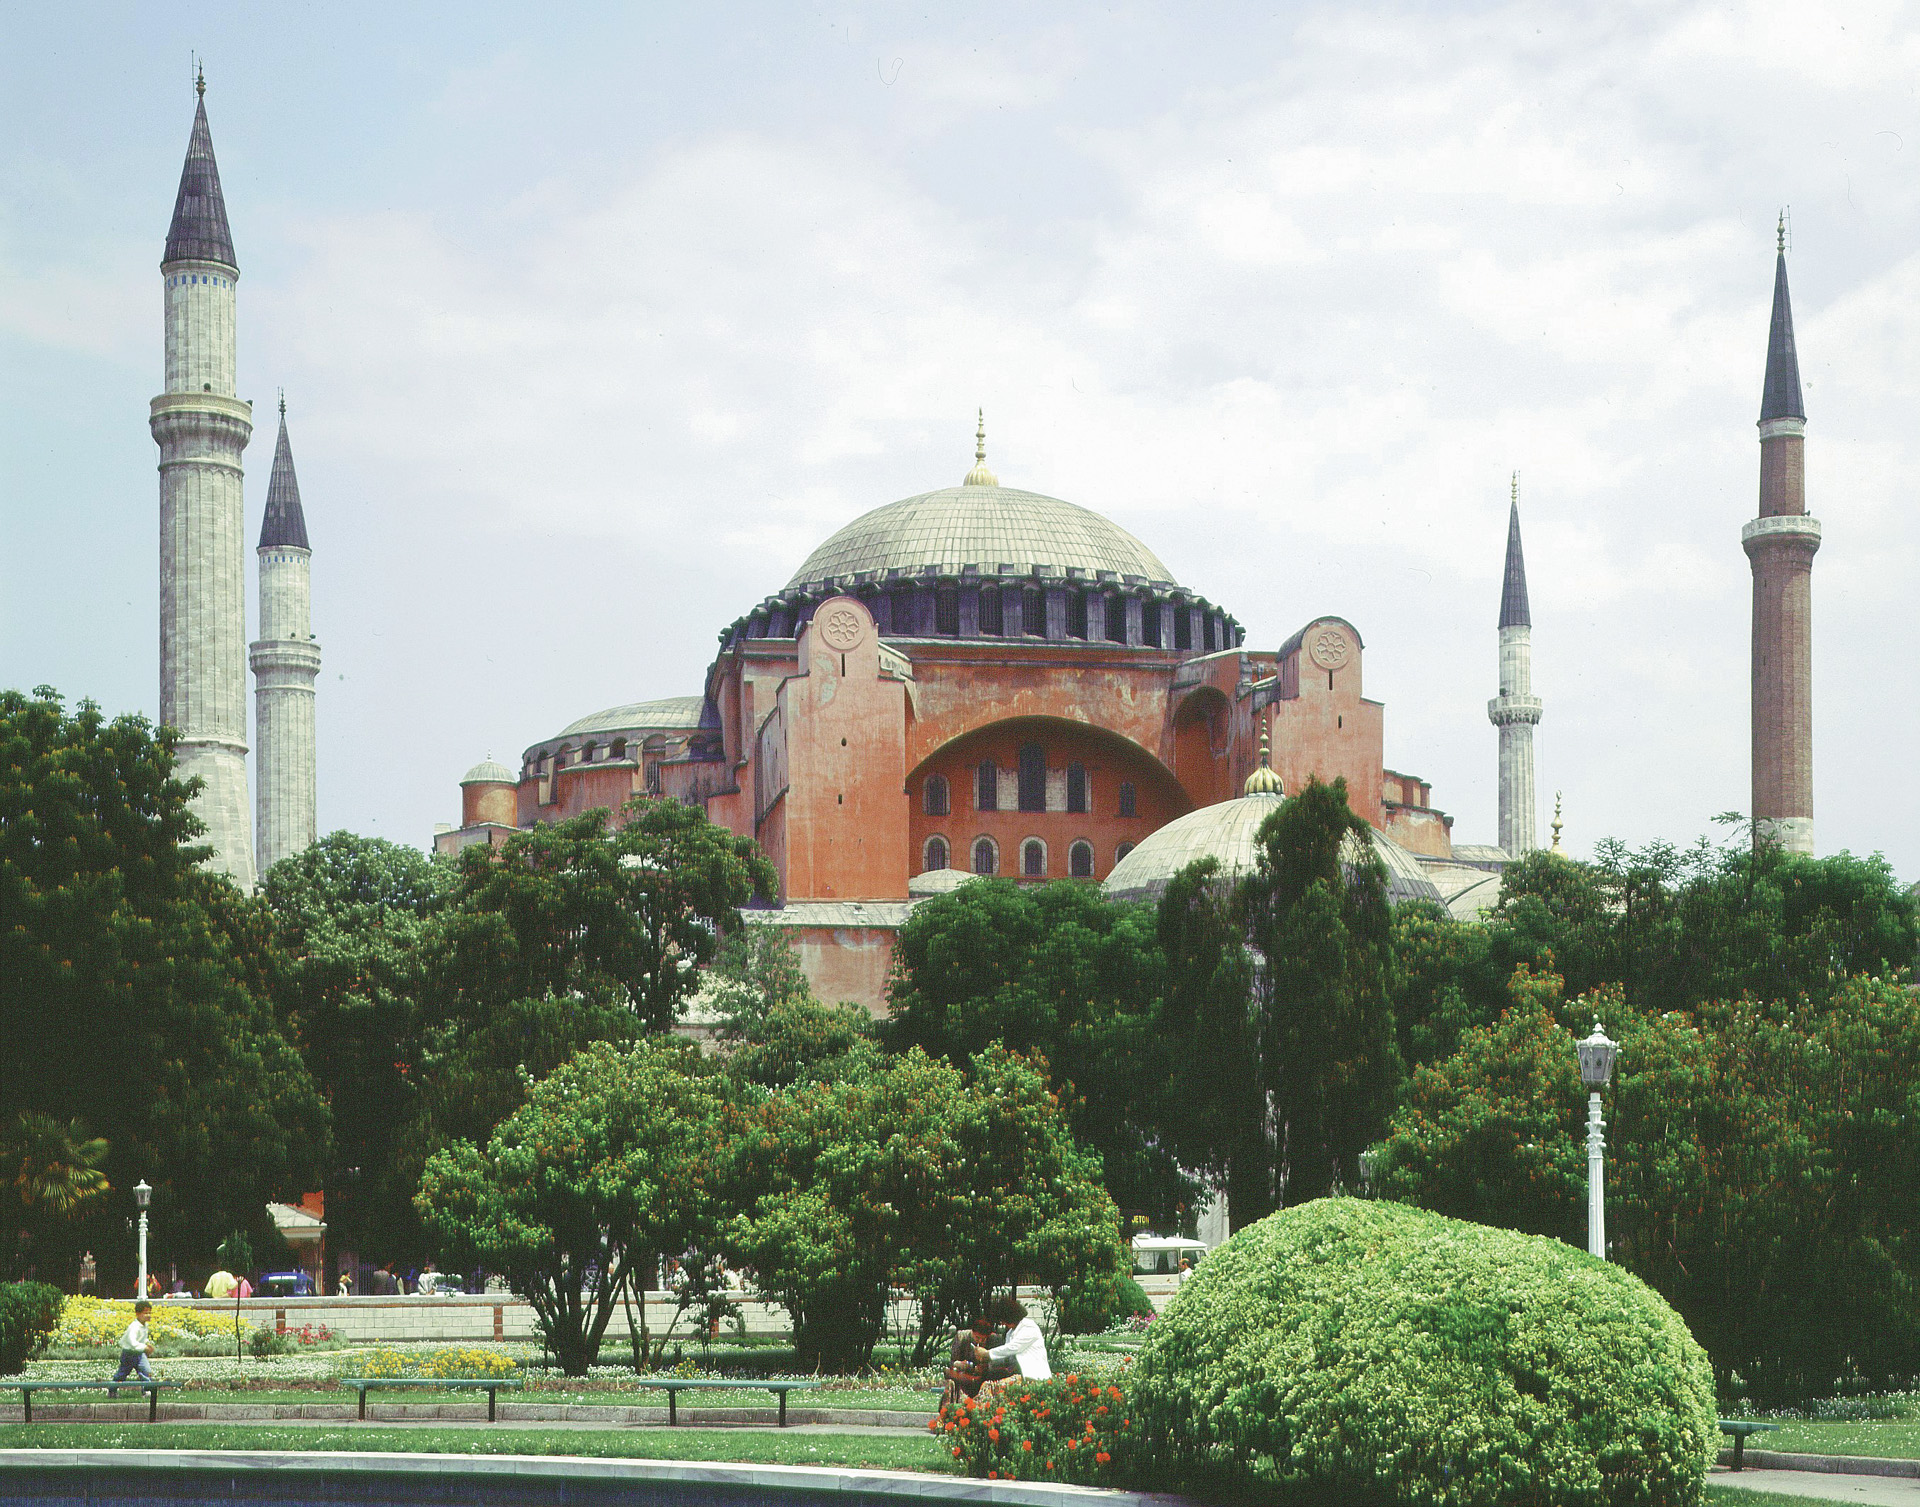 The Hagia Sophia (Cathedral of the Holy Wisdom), 900 years old at the time of the attack, was a last refuge for many in the city.  